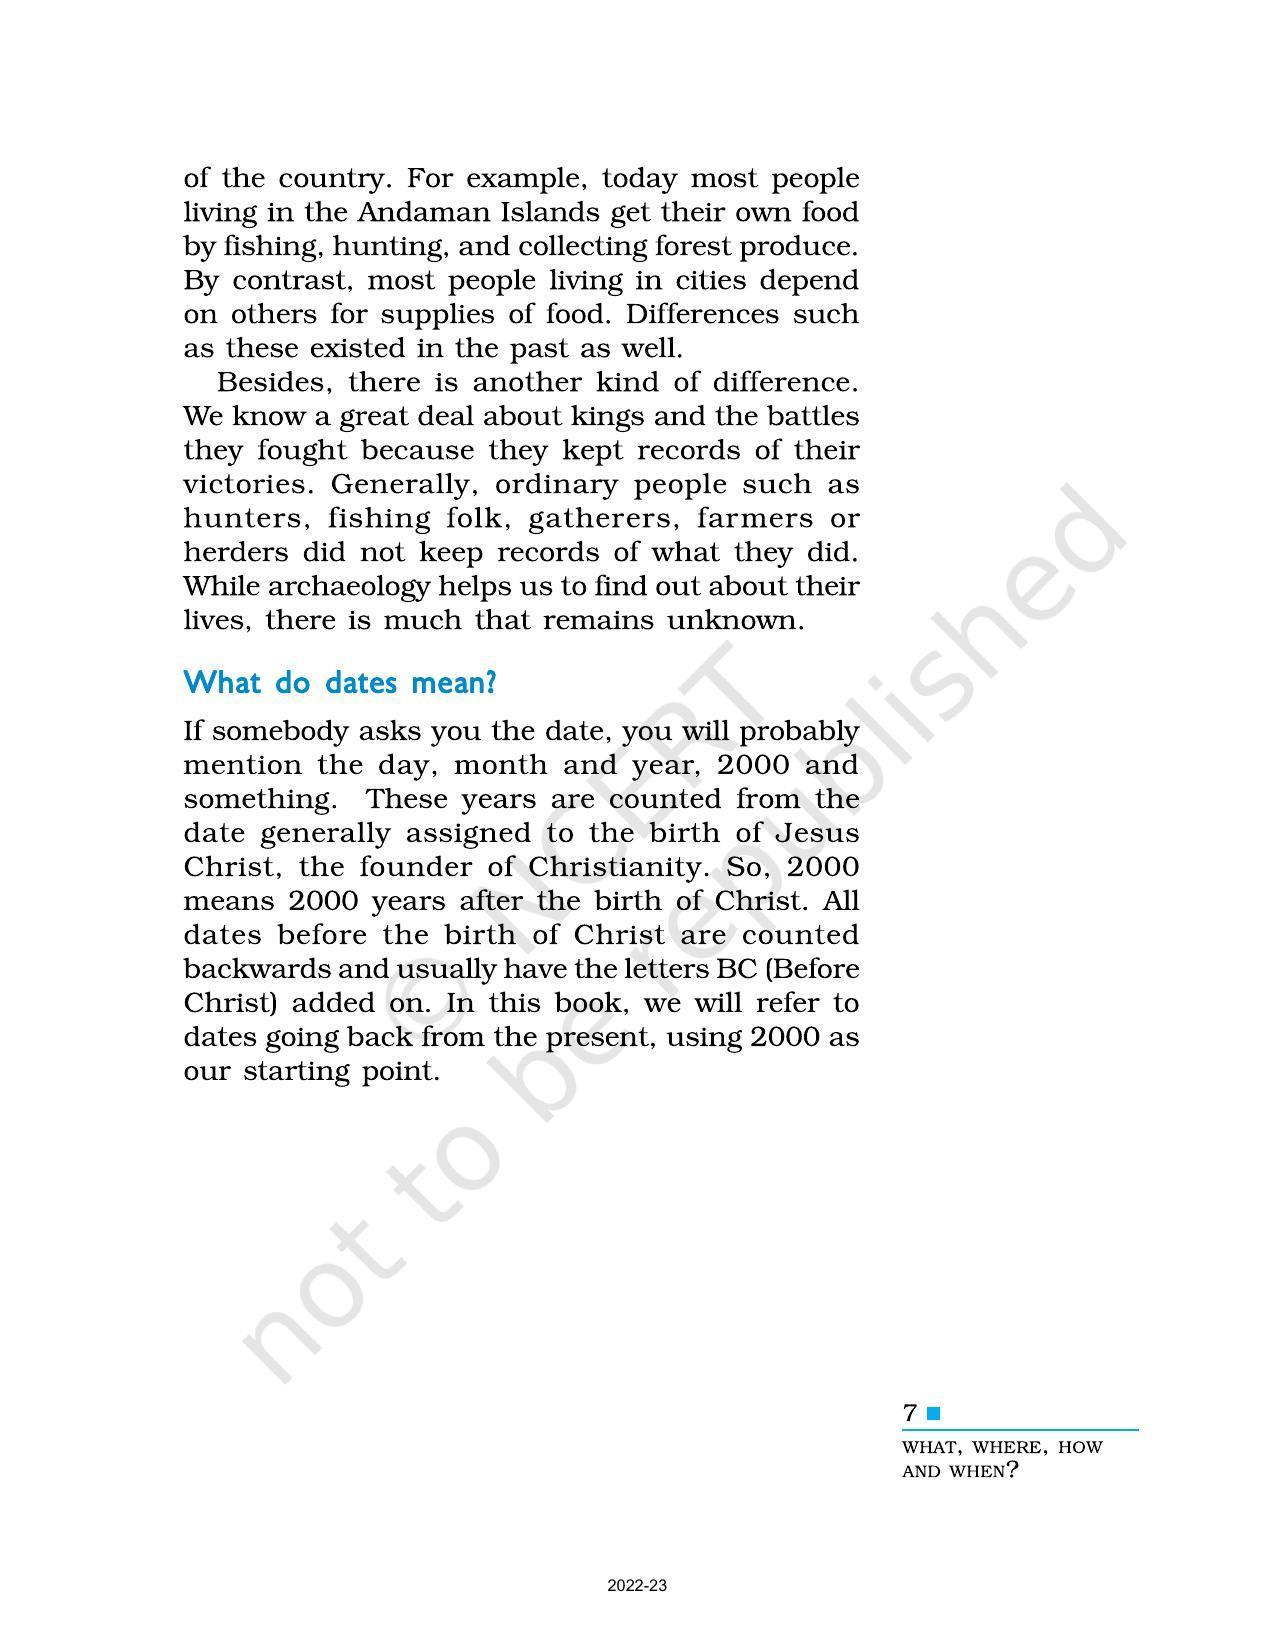 NCERT Book for Class 6 History (Social Science) : Chapter 1-What Where, How, and When? - Page 7